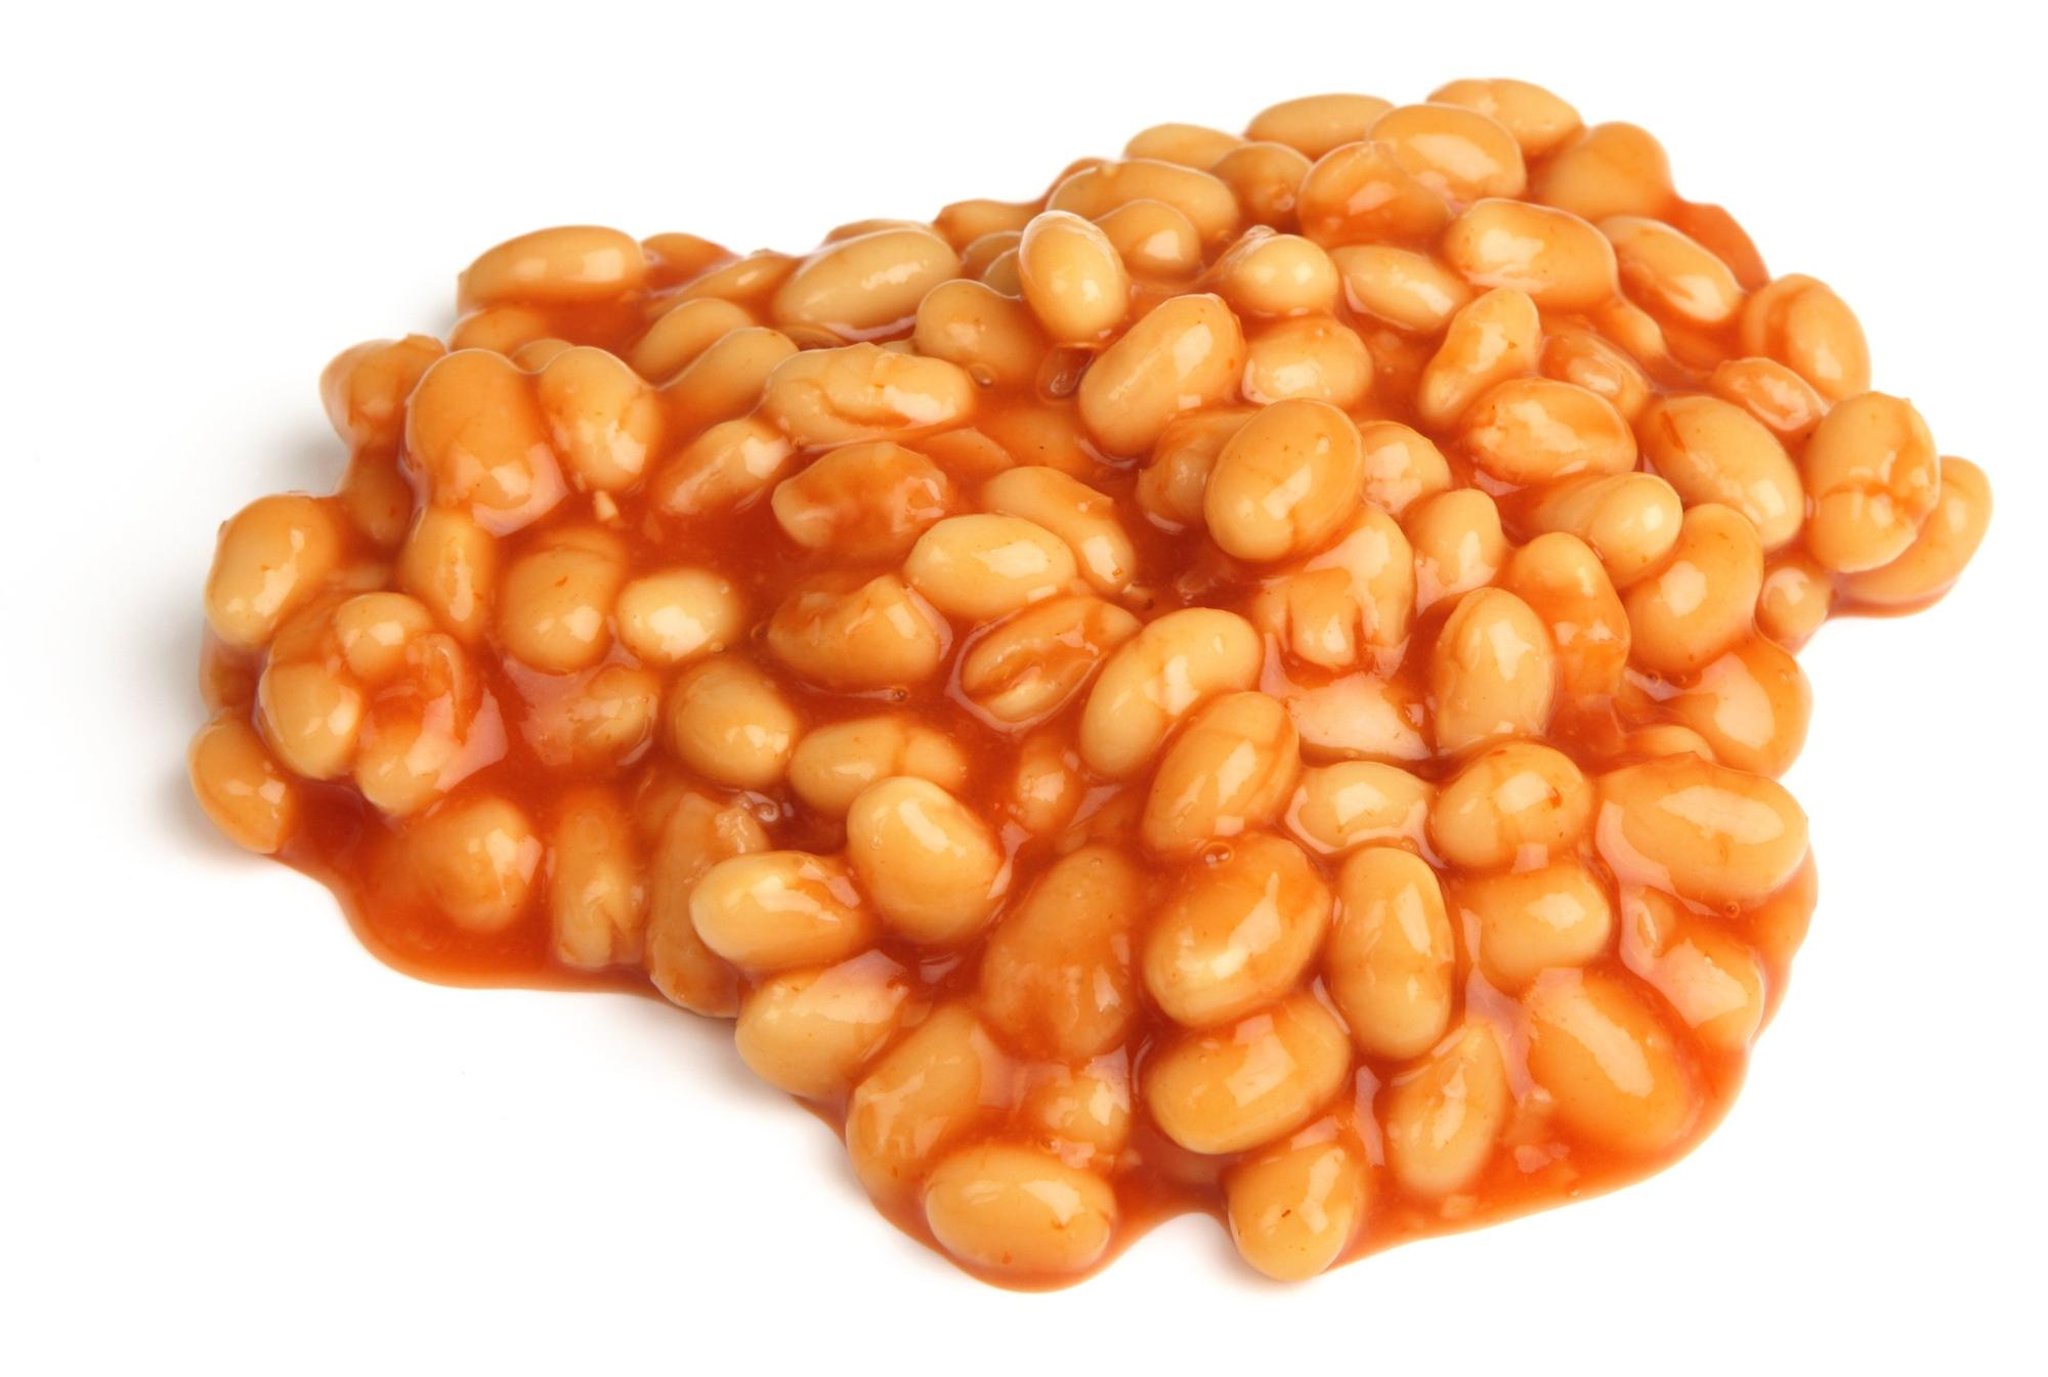 Here's why shops are being warned about selling baked beans to kids | The  News